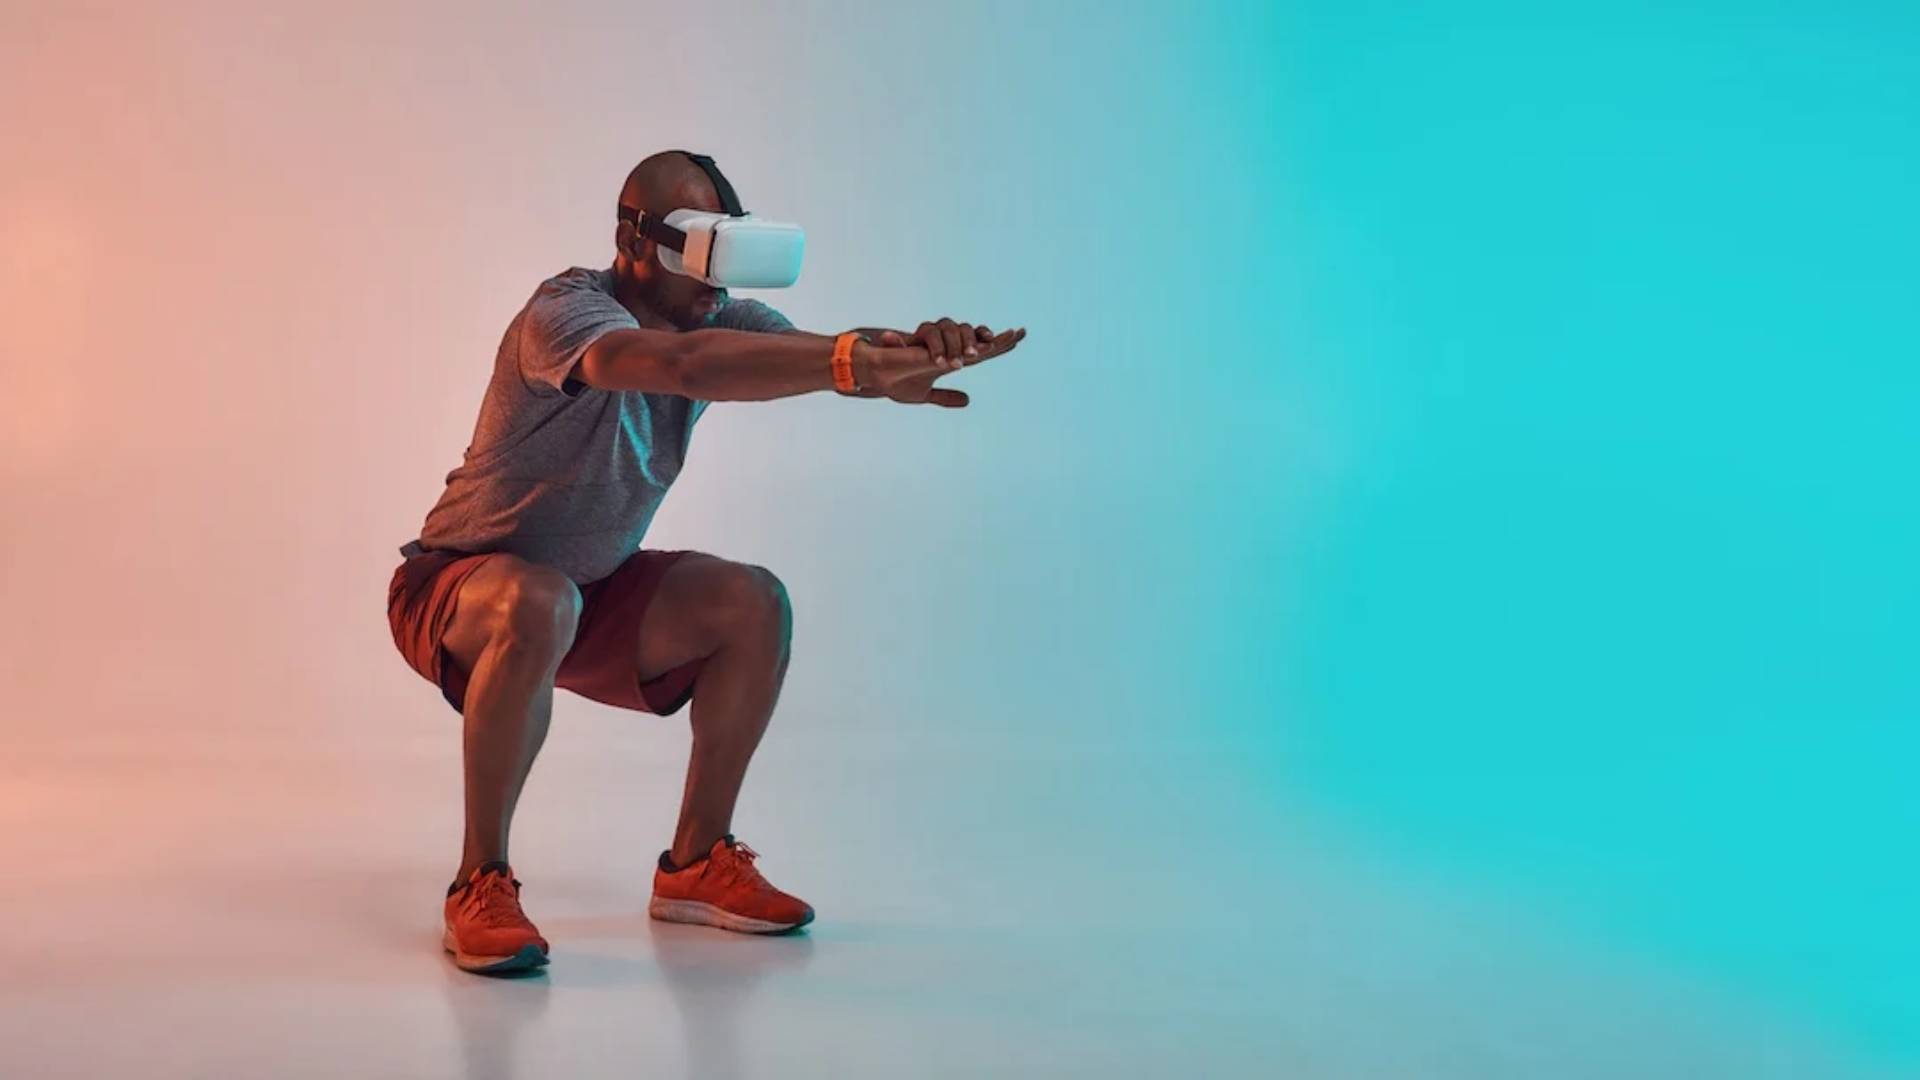 Quest 2 fitness games: a man doing a squat wearing a VR headset